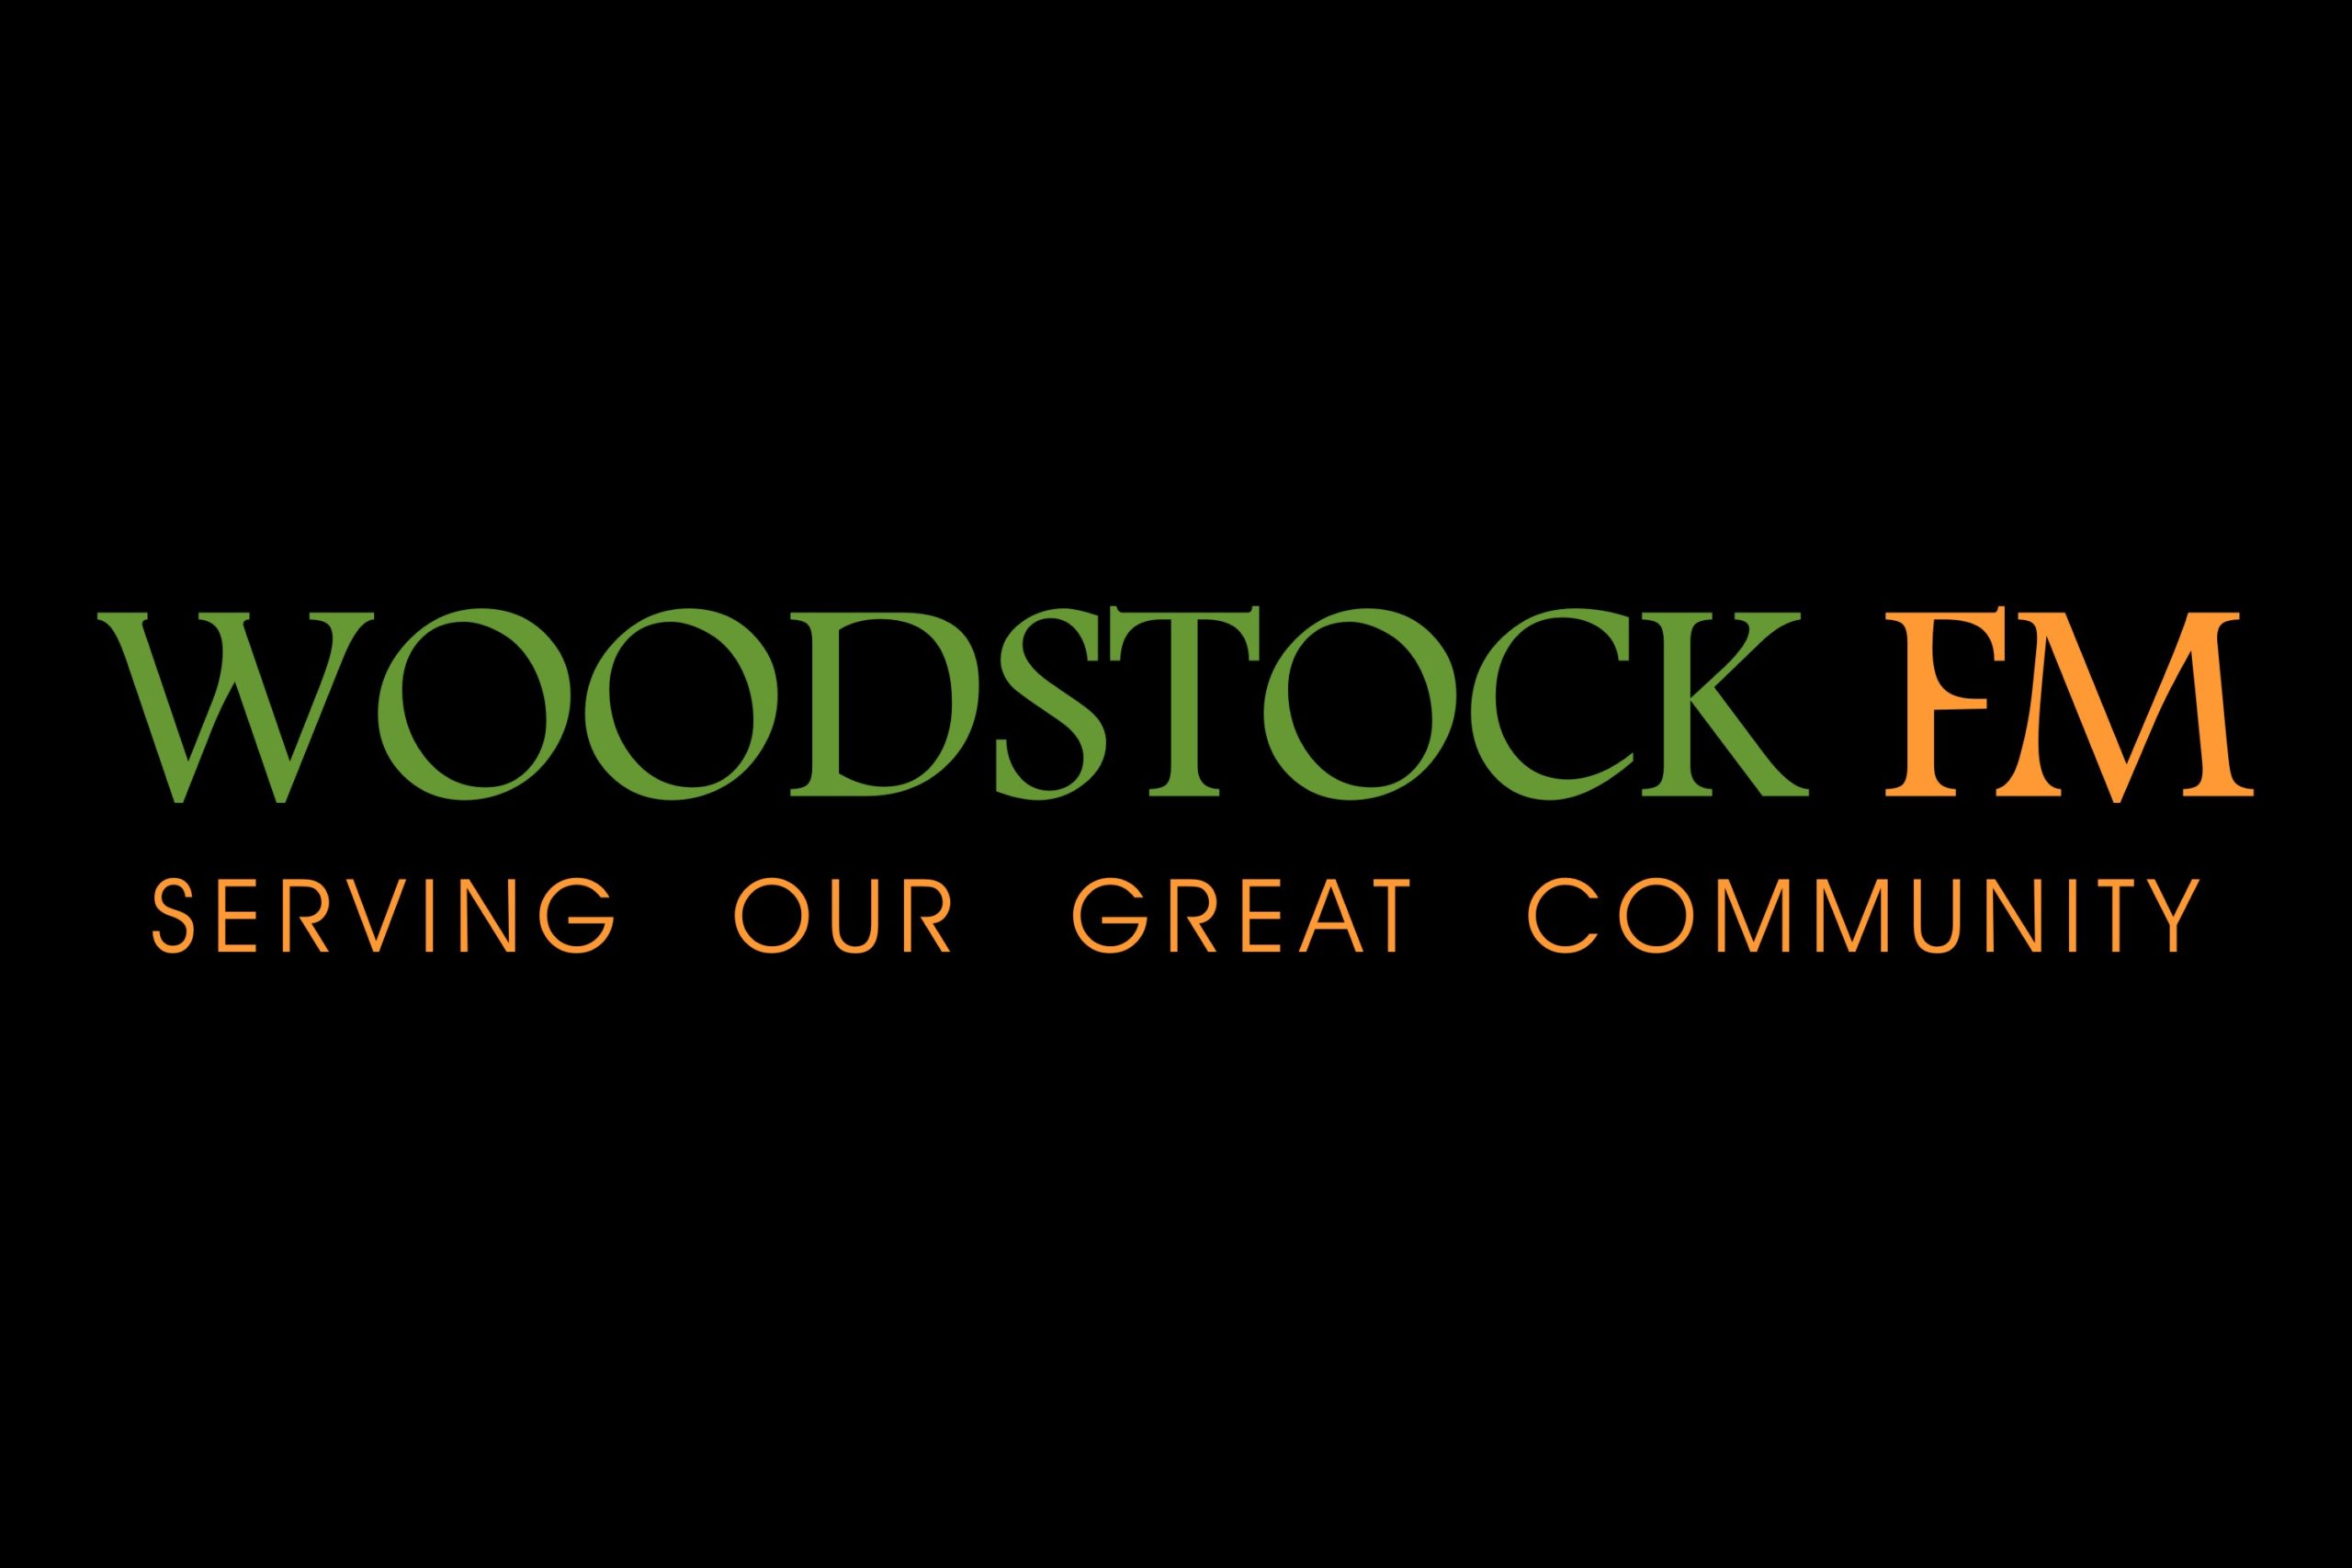 Woodstock FM - Serving Our Great Community